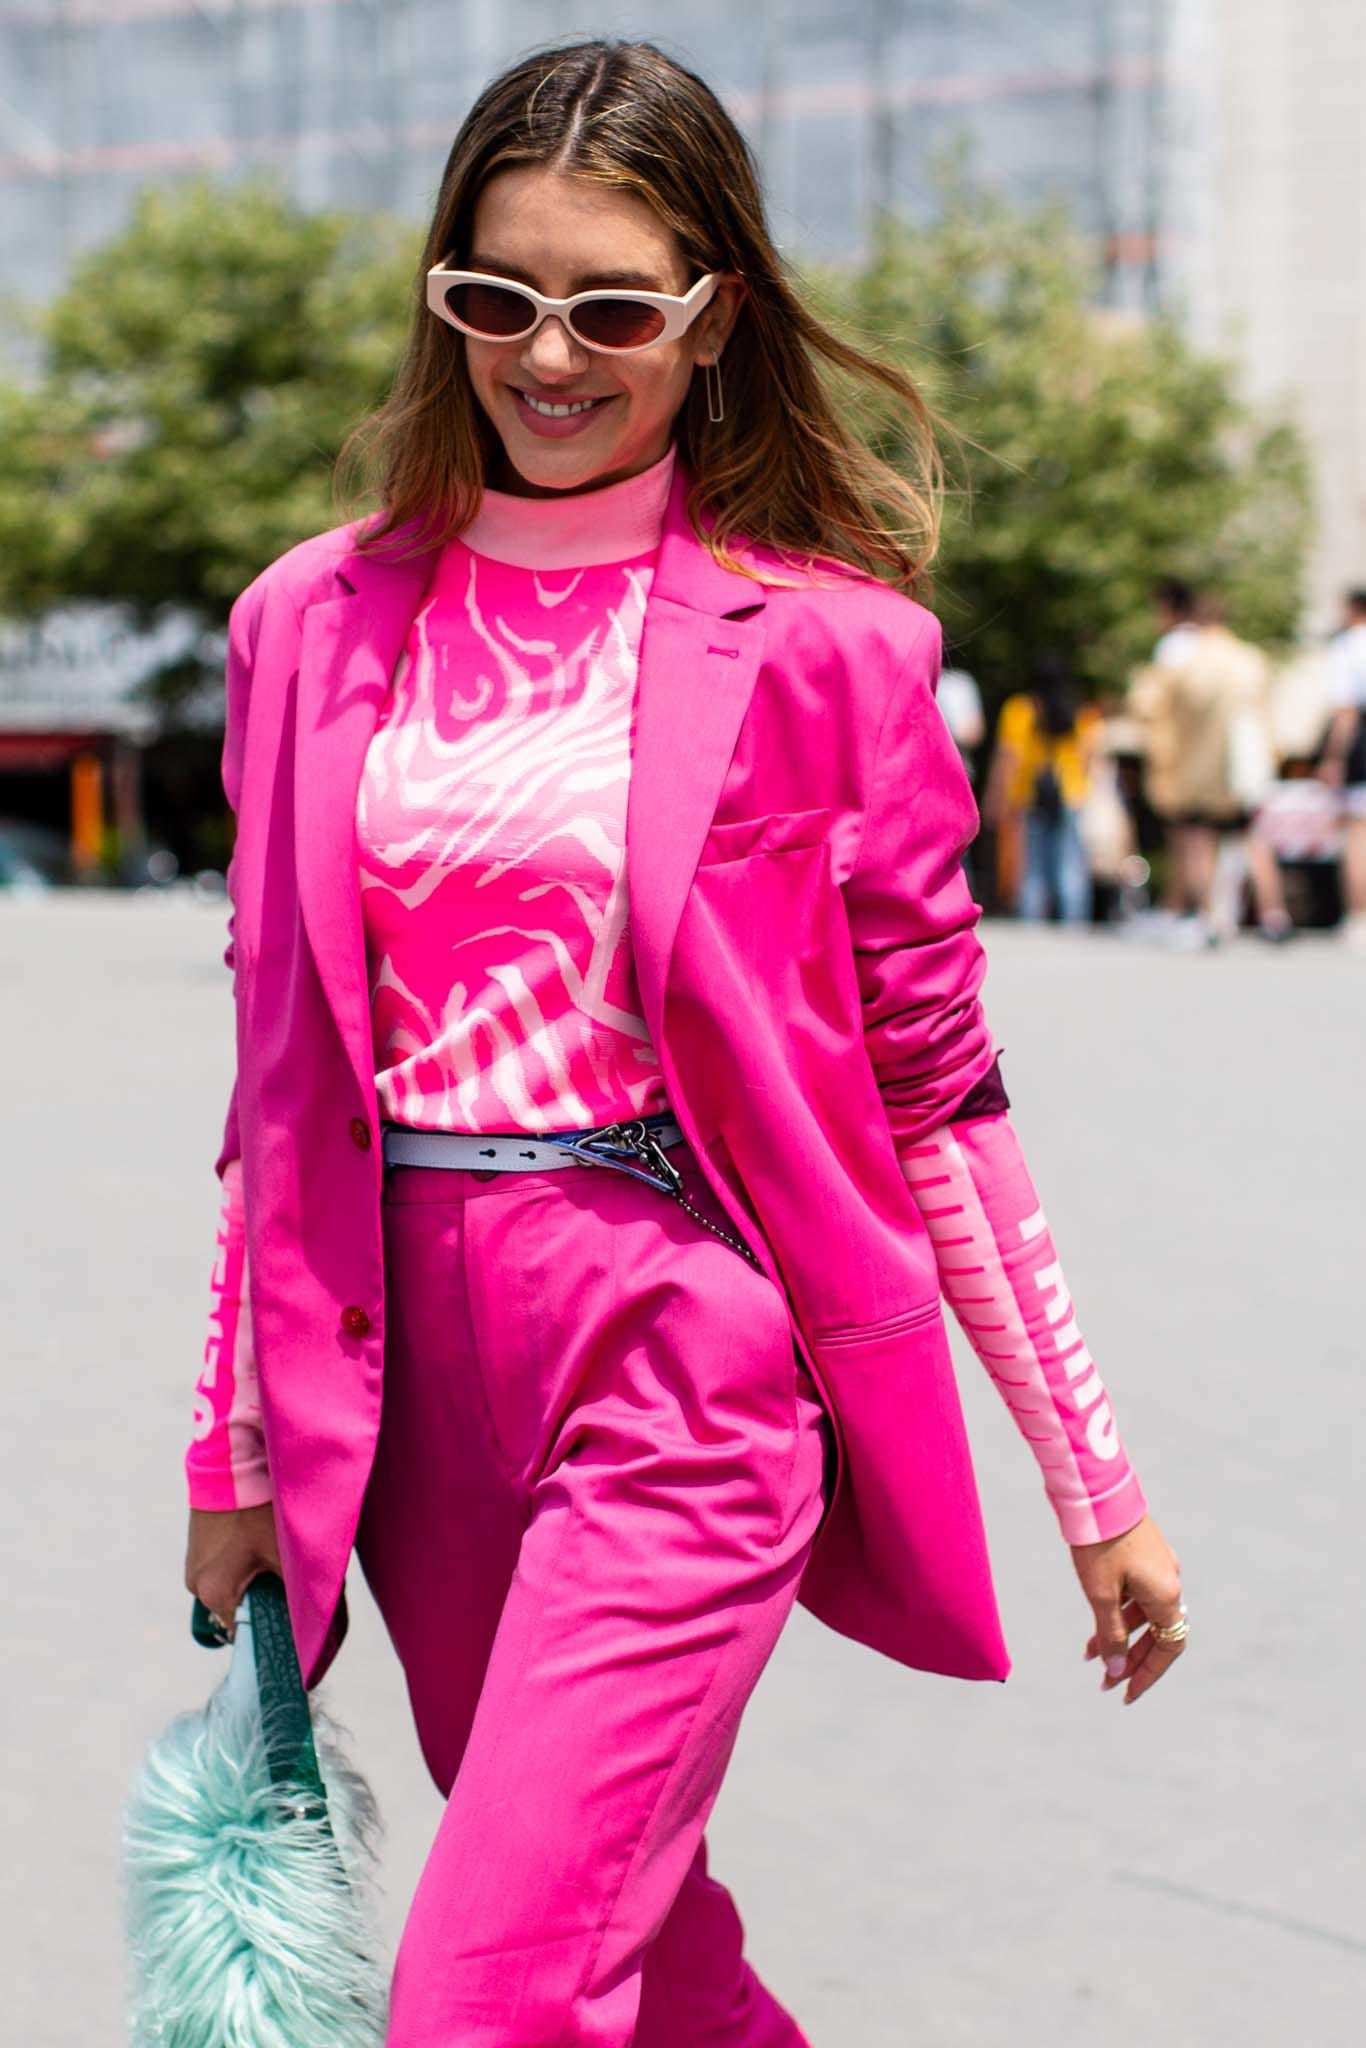 Neon Pink Outfits and Center Parts Are Everywhere This Summer | All ...